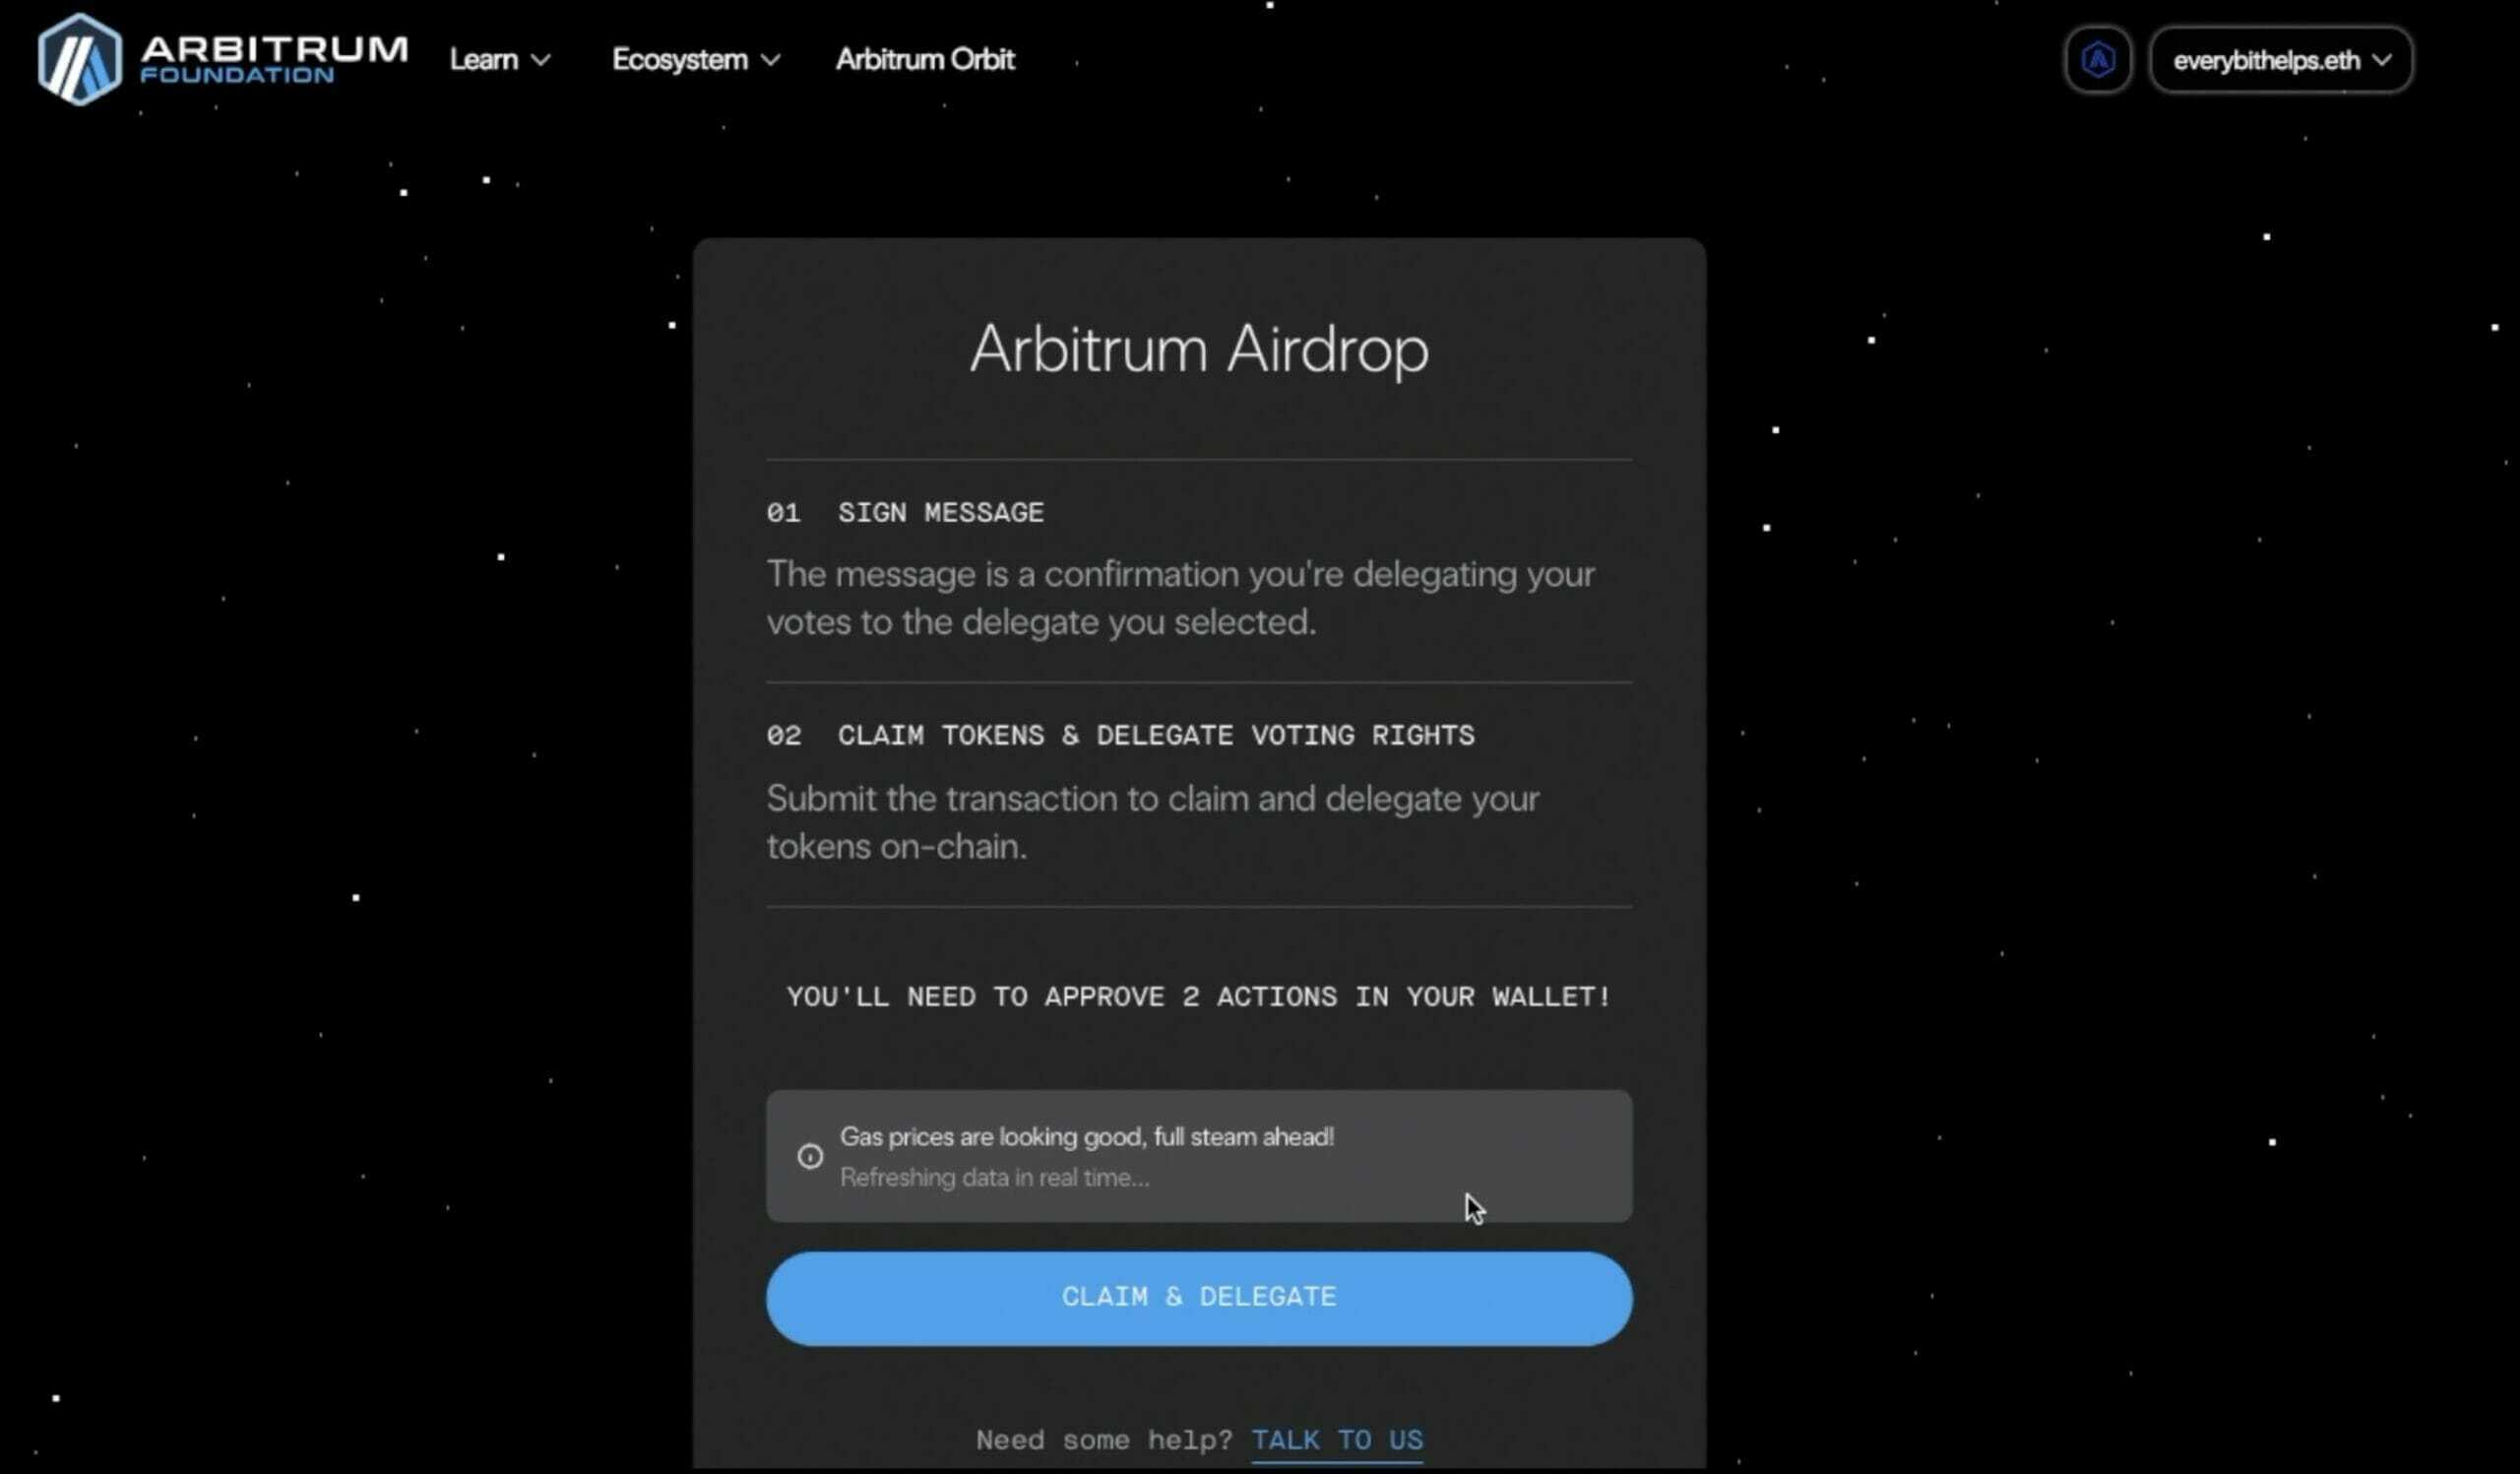 How to claim and delegate with the Arbitrum Airdrop